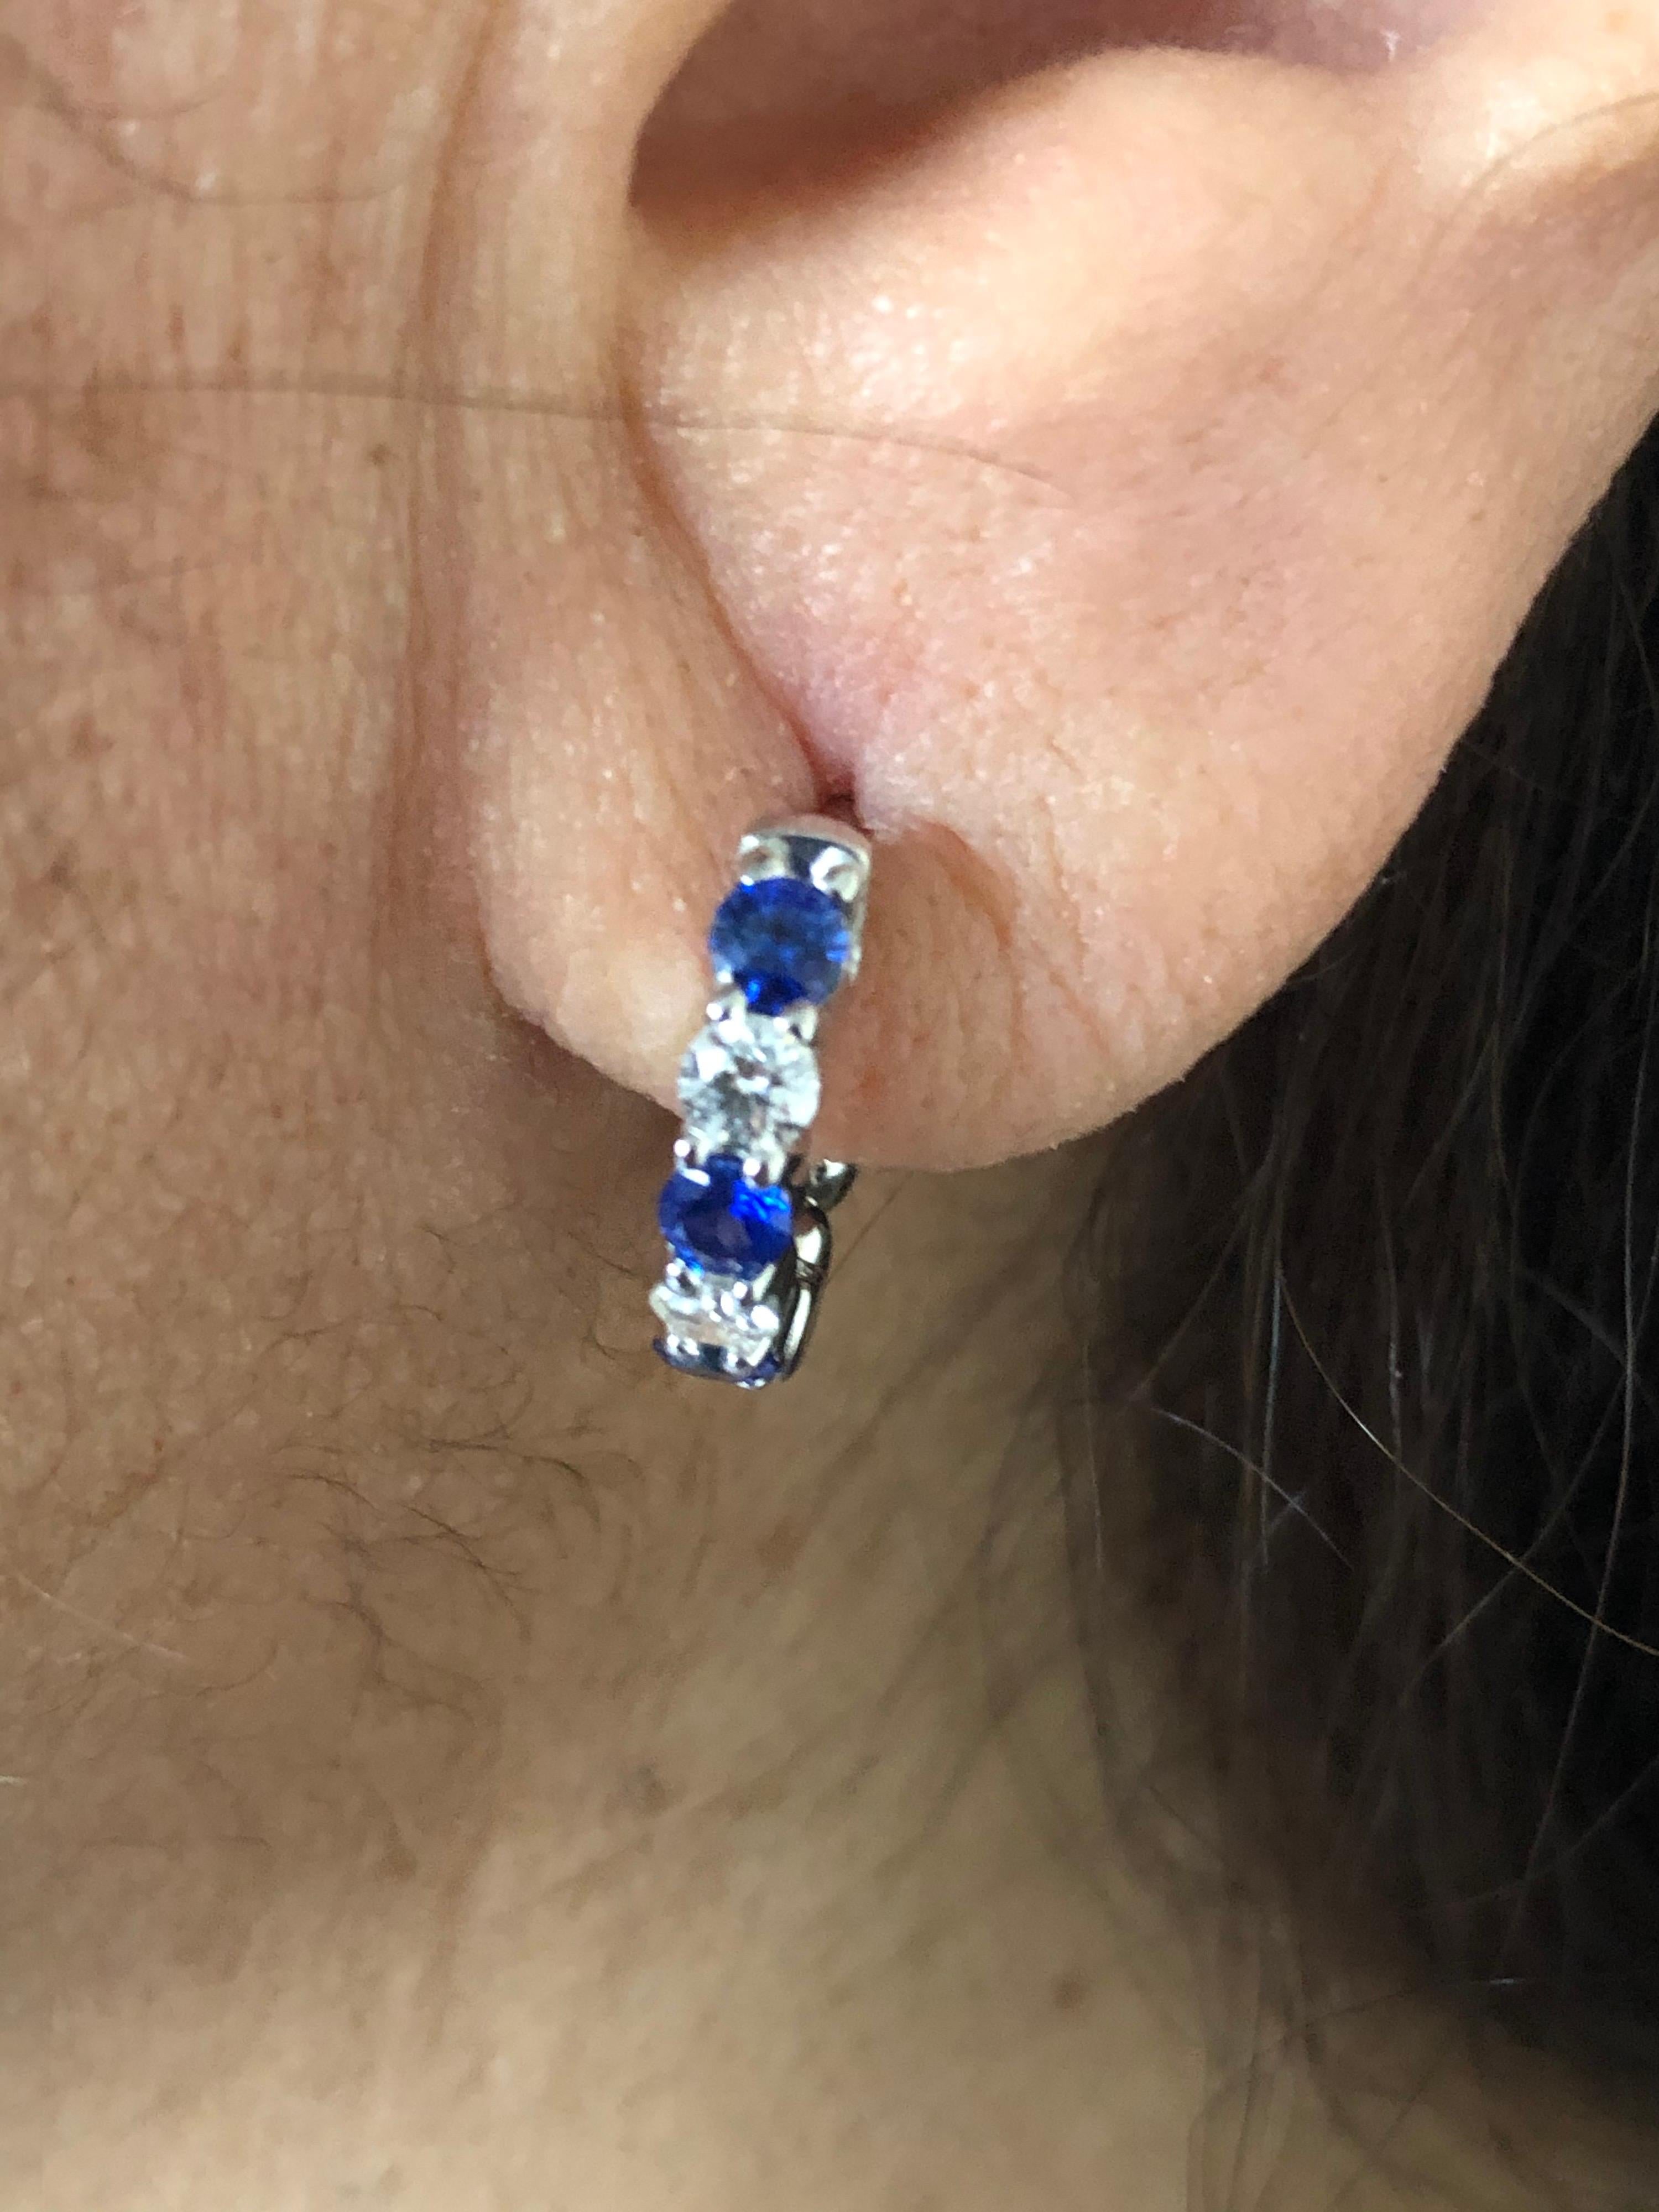 Sapphire and diamond huggies set in 14K white gold. Stone are only set on the outside of the hoop. The hoops are set with 6 sapphires and 4 white diamonds. The total carat weight of the sapphires is 0.80 carats and the weight of the diamonds is 0.40